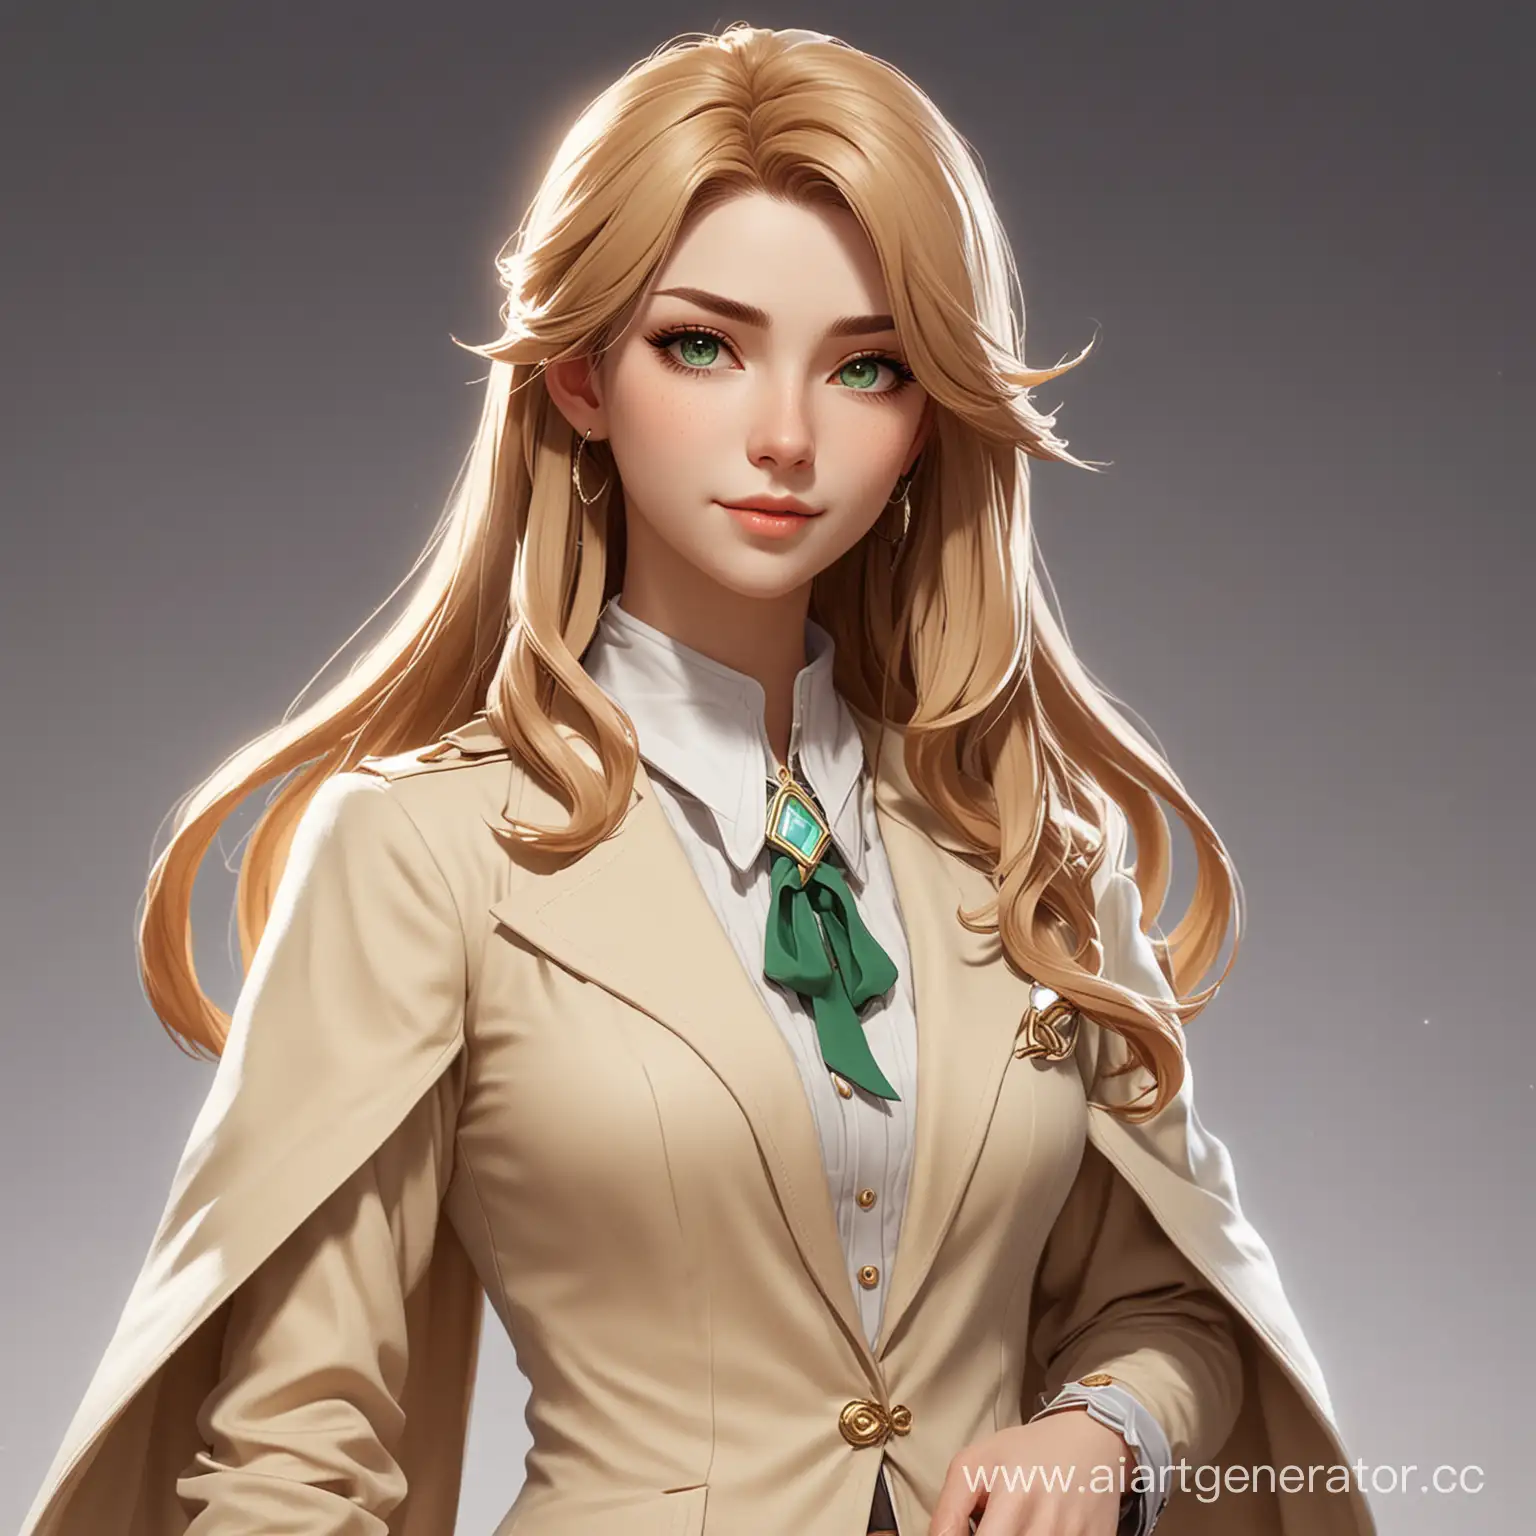 Dendro-Magician-Elegant-Psychologist-in-Beige-Suit-with-Long-LightBrown-Hair-and-Green-Eyes